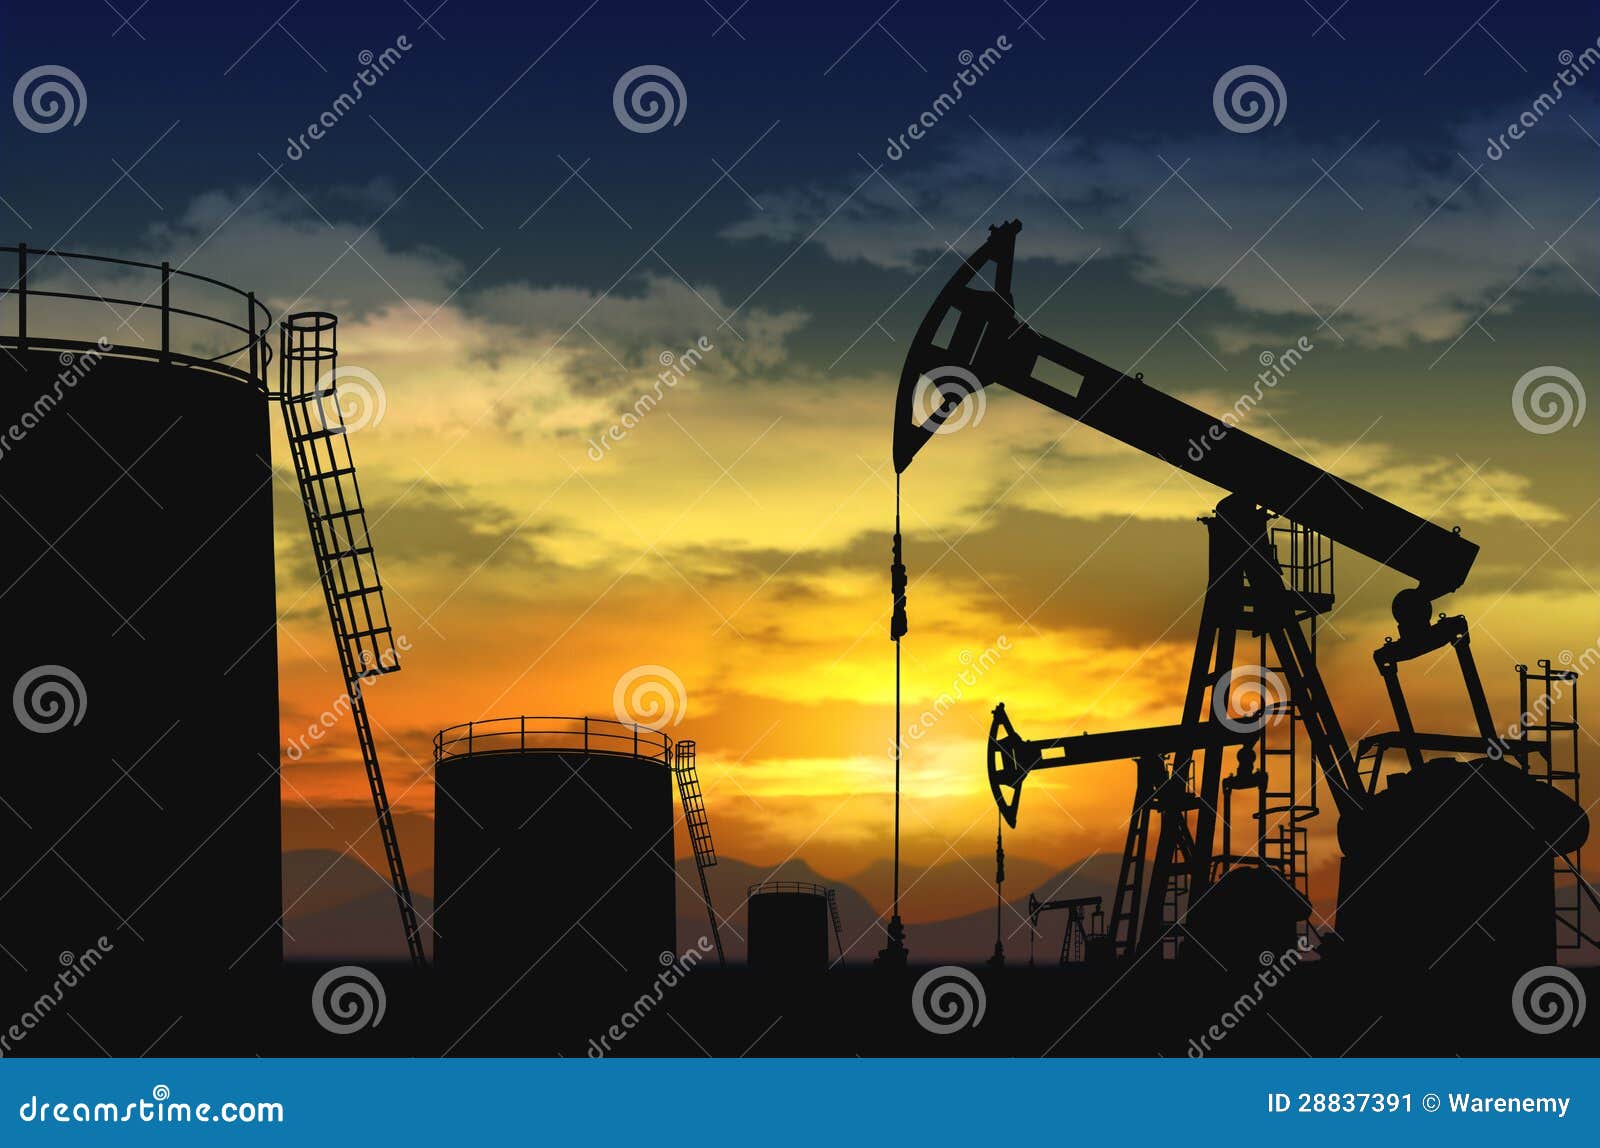 oil pump jack and oil tank